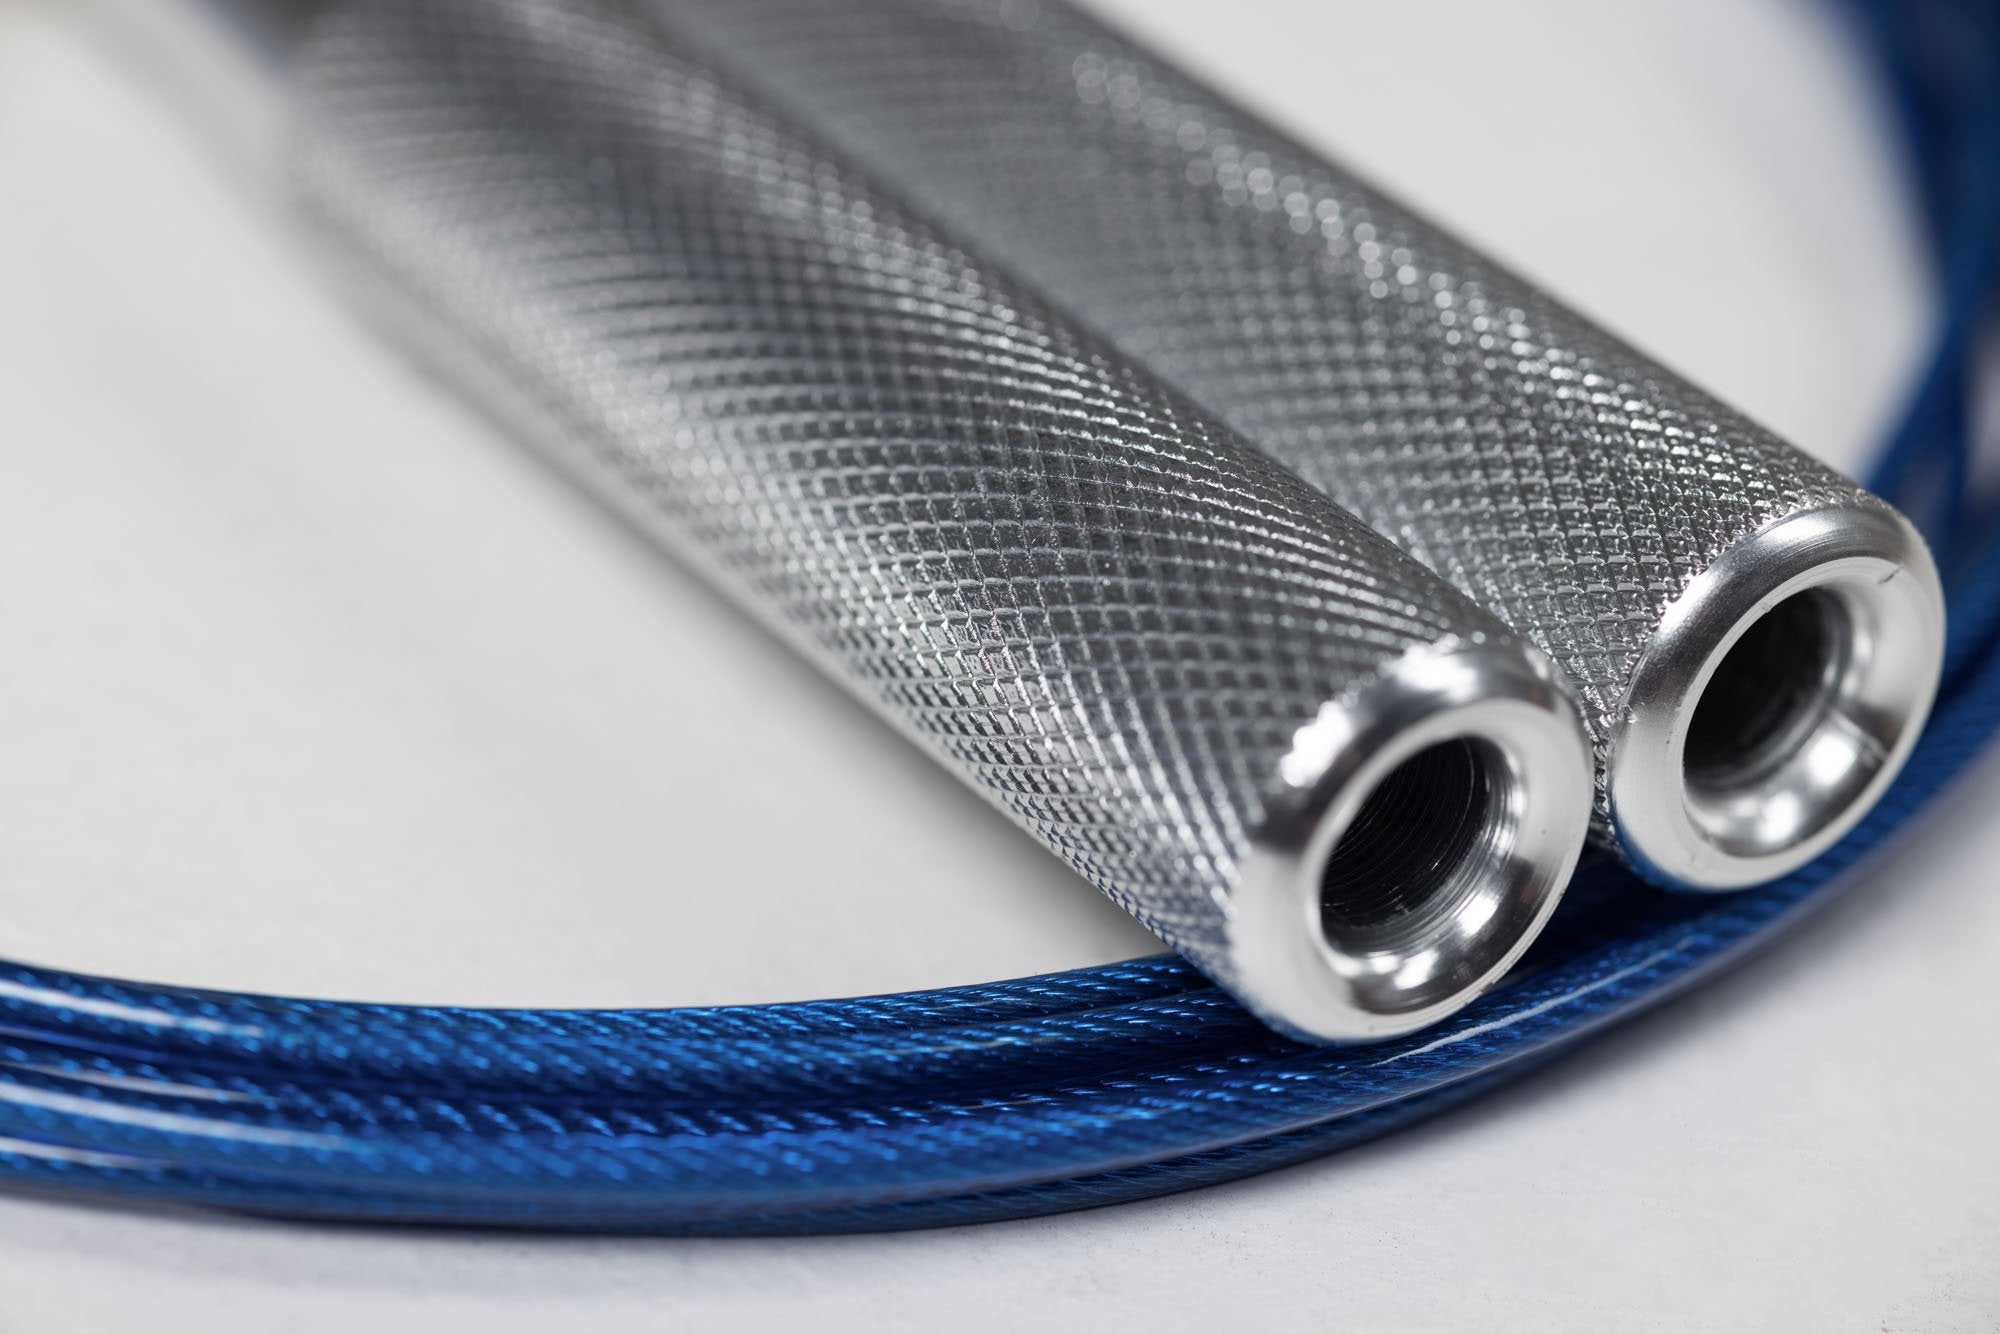 Competition Speed Rope Close Up of Silver Handles and Knurl